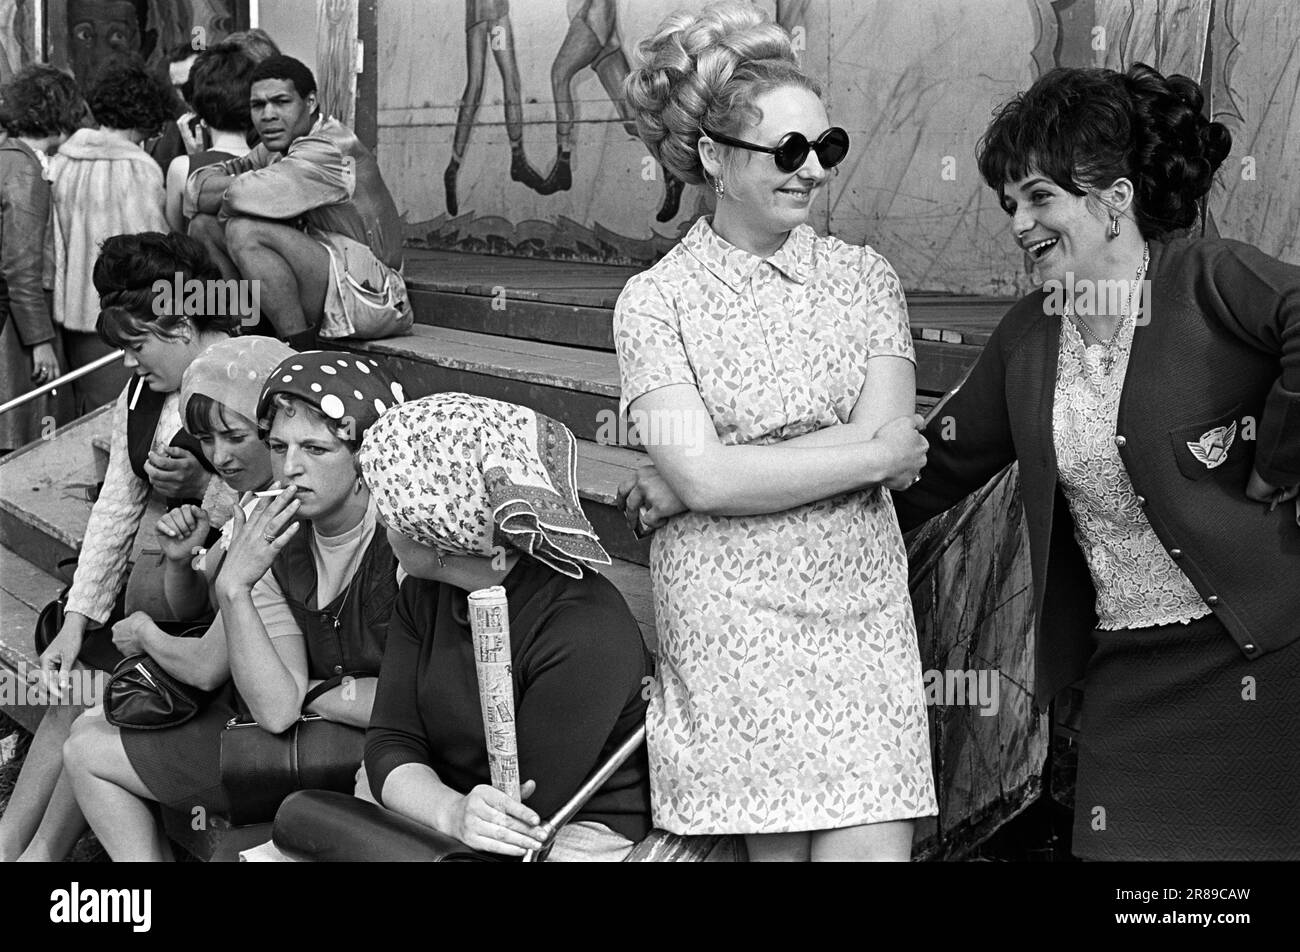 Gypsy women outside Pat McKeowen's prize fighting fairground boxing booth. Three women are wearing headscarfs to hid their hair that's in curlers. The woman in dark glasses wears her hair in a 'beehive', fashionable at the time. The Derby, an annual festival of horse racing.  Epsom Downs, Surrey England June 1969 1960s UK HOMER SYKES Stock Photo